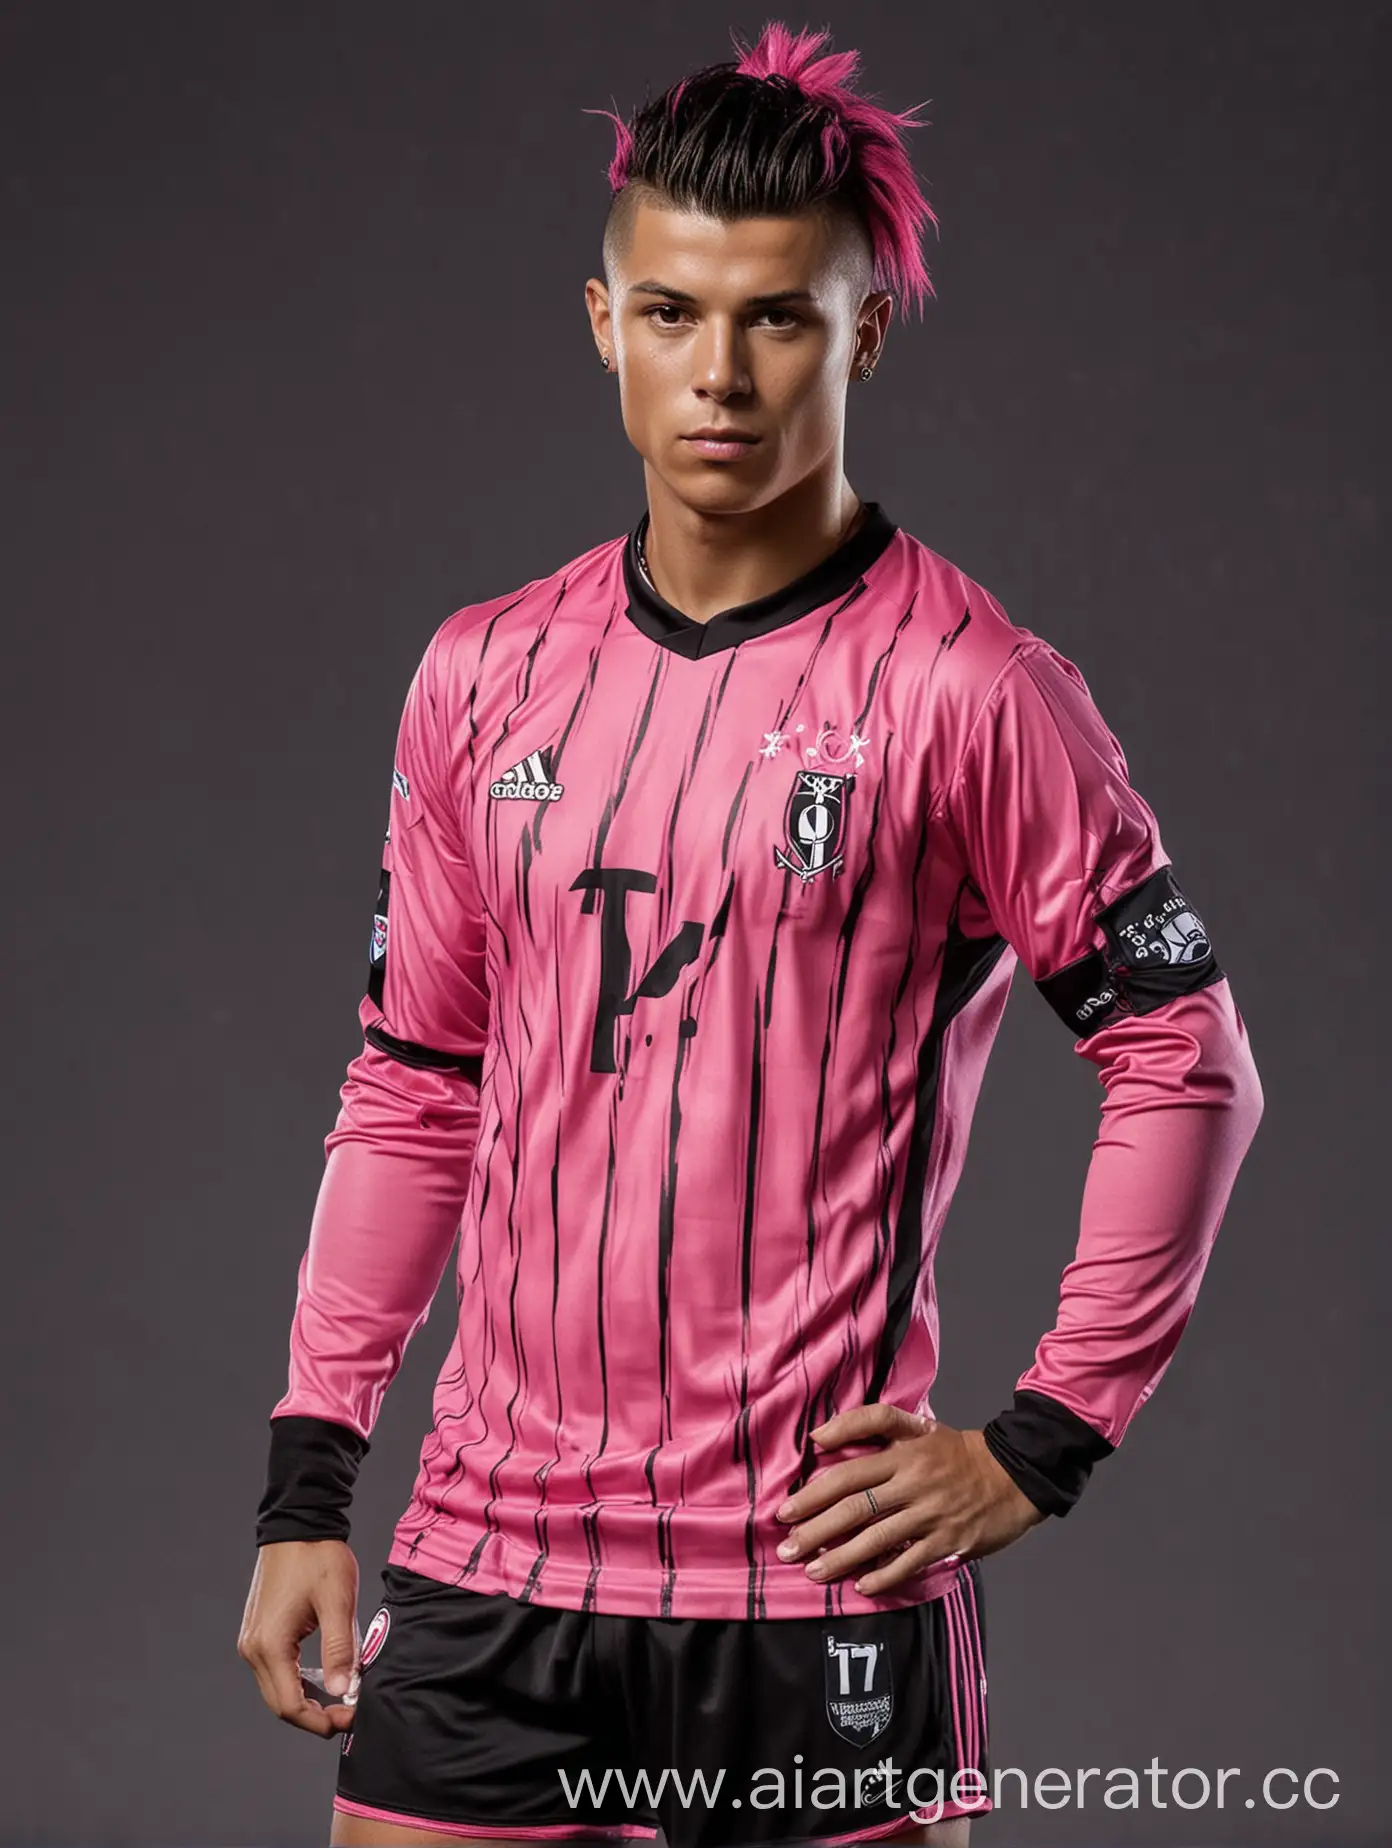 Ronaldo-in-Edgy-Pink-and-Black-Soccer-Outfit-with-Emo-Style